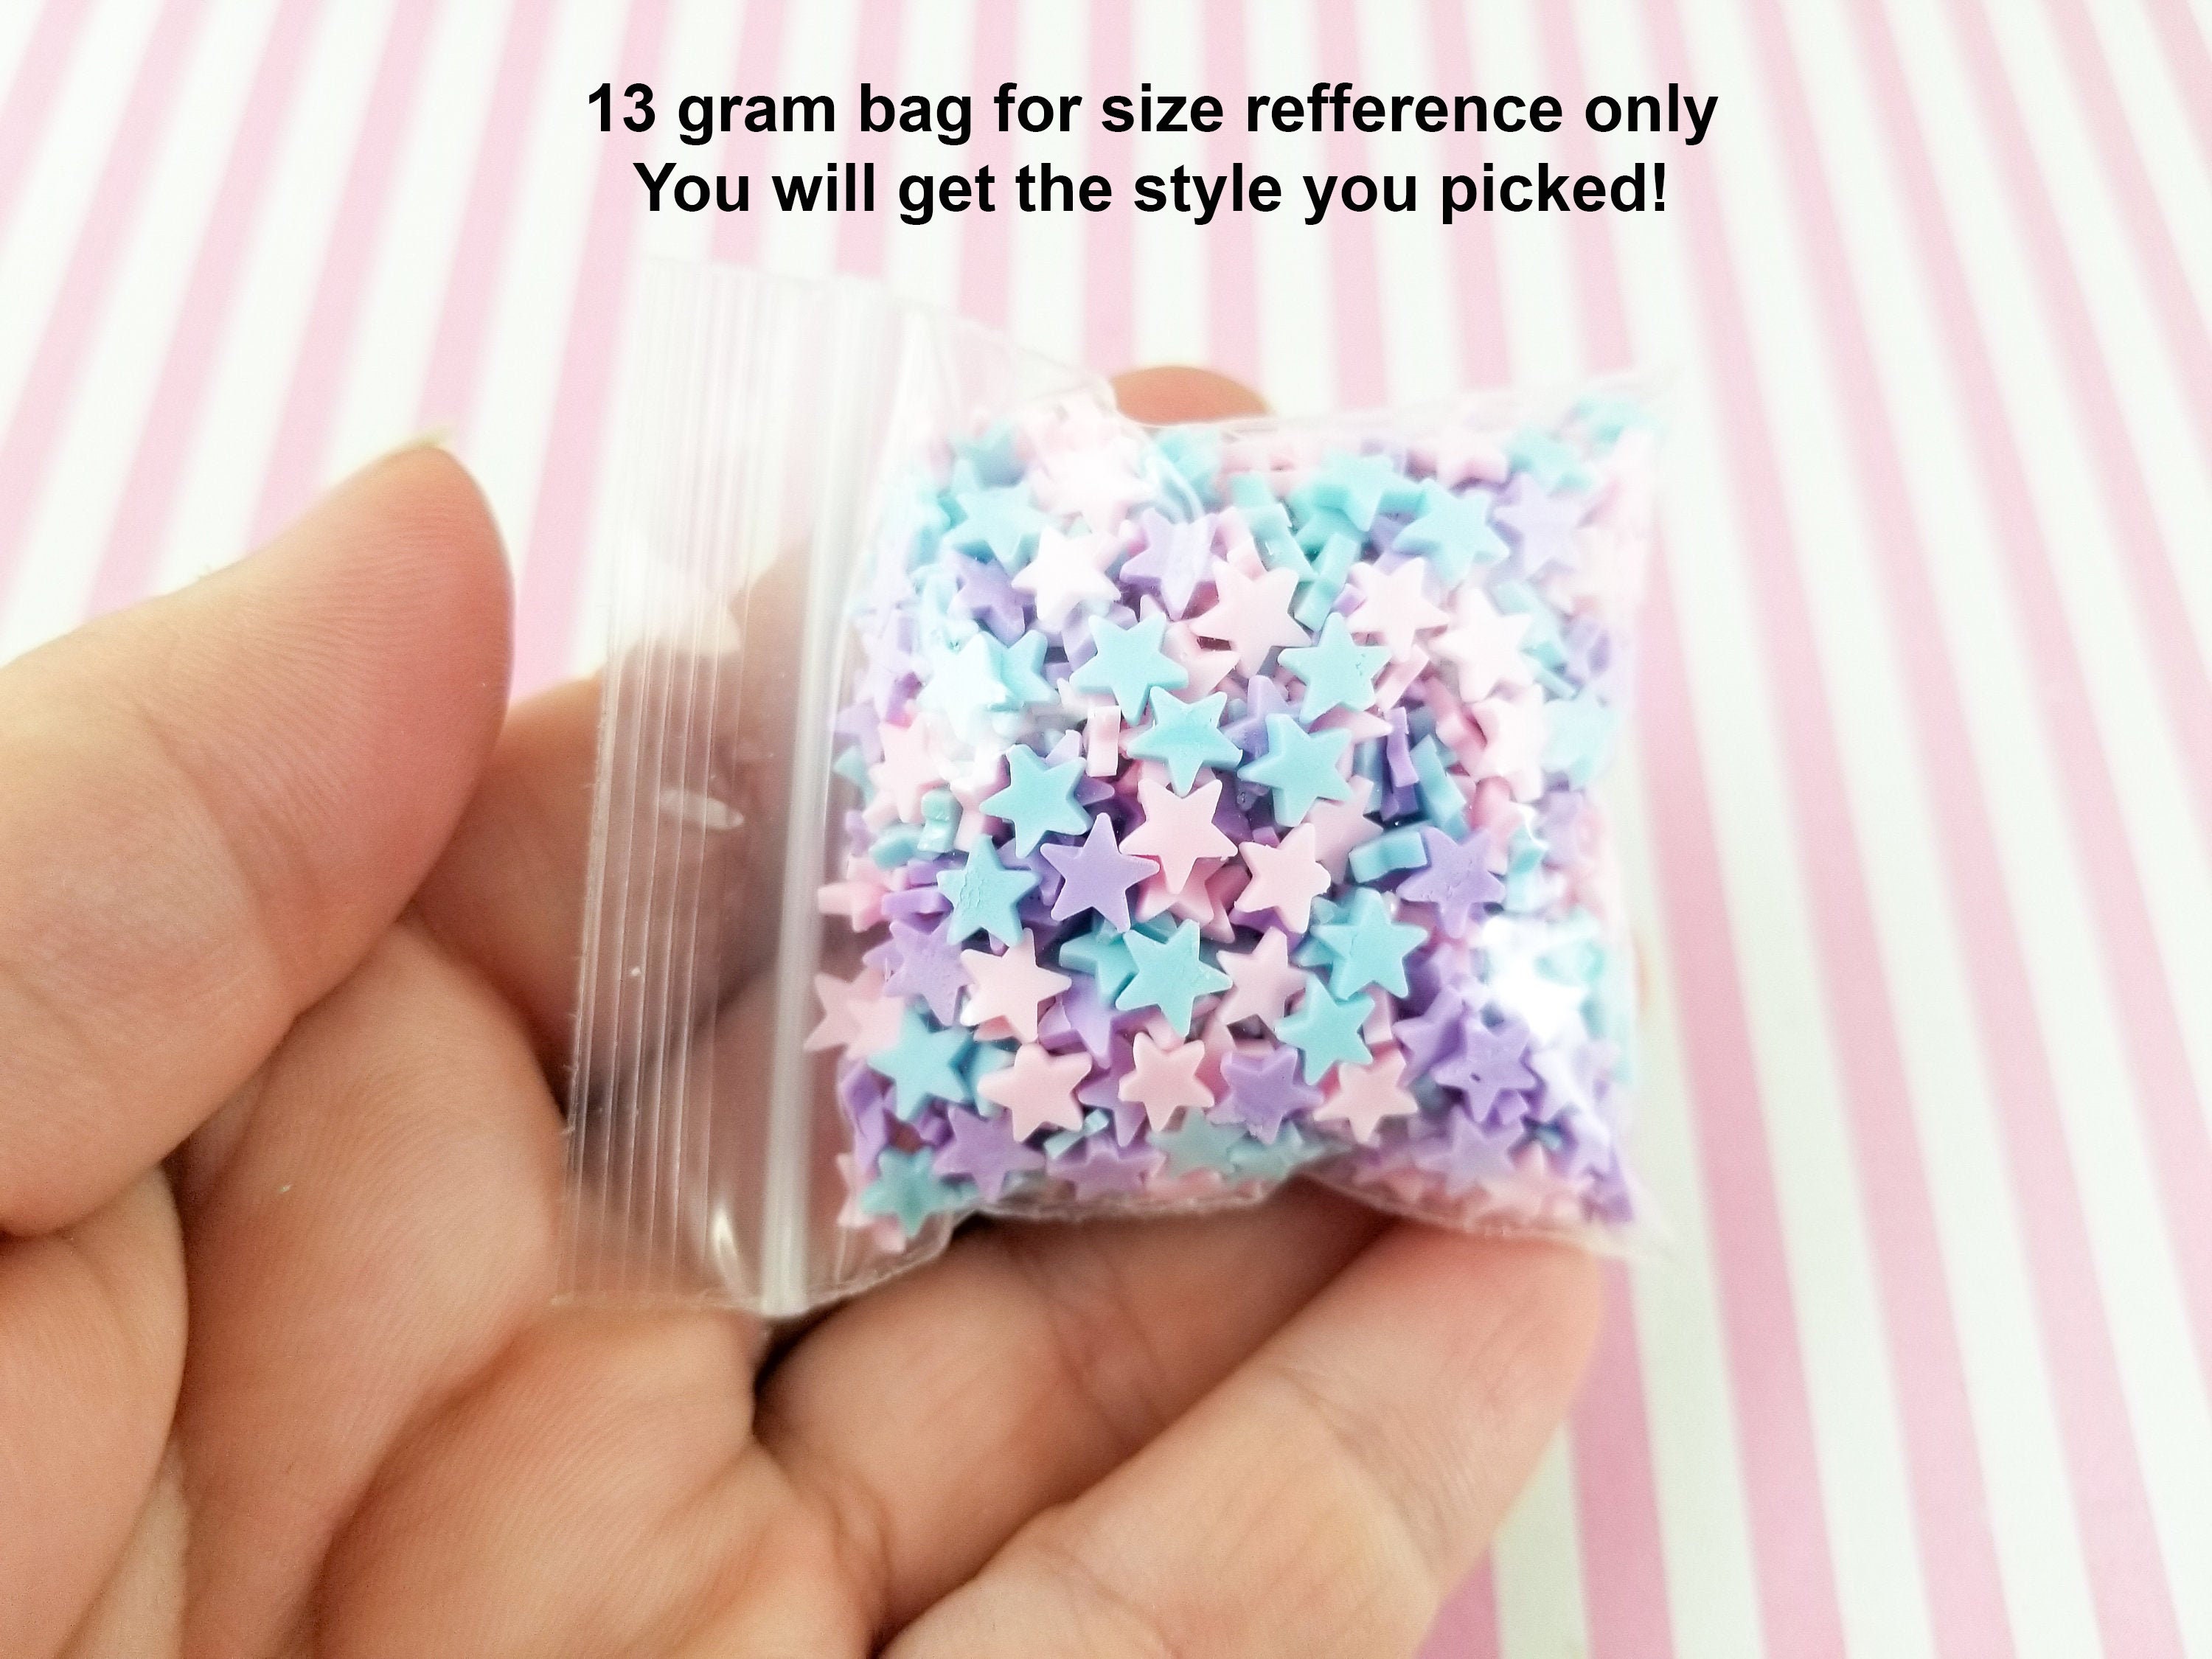  50g Vibrant Rainbow Fake Sprinkles Clay Sprinkle for Slime  decoden Cookies, Fake Candy Sweets Sugar Sprinkles, DIY Polymer Clay Fimo  Slice, Fake Baking Supplies